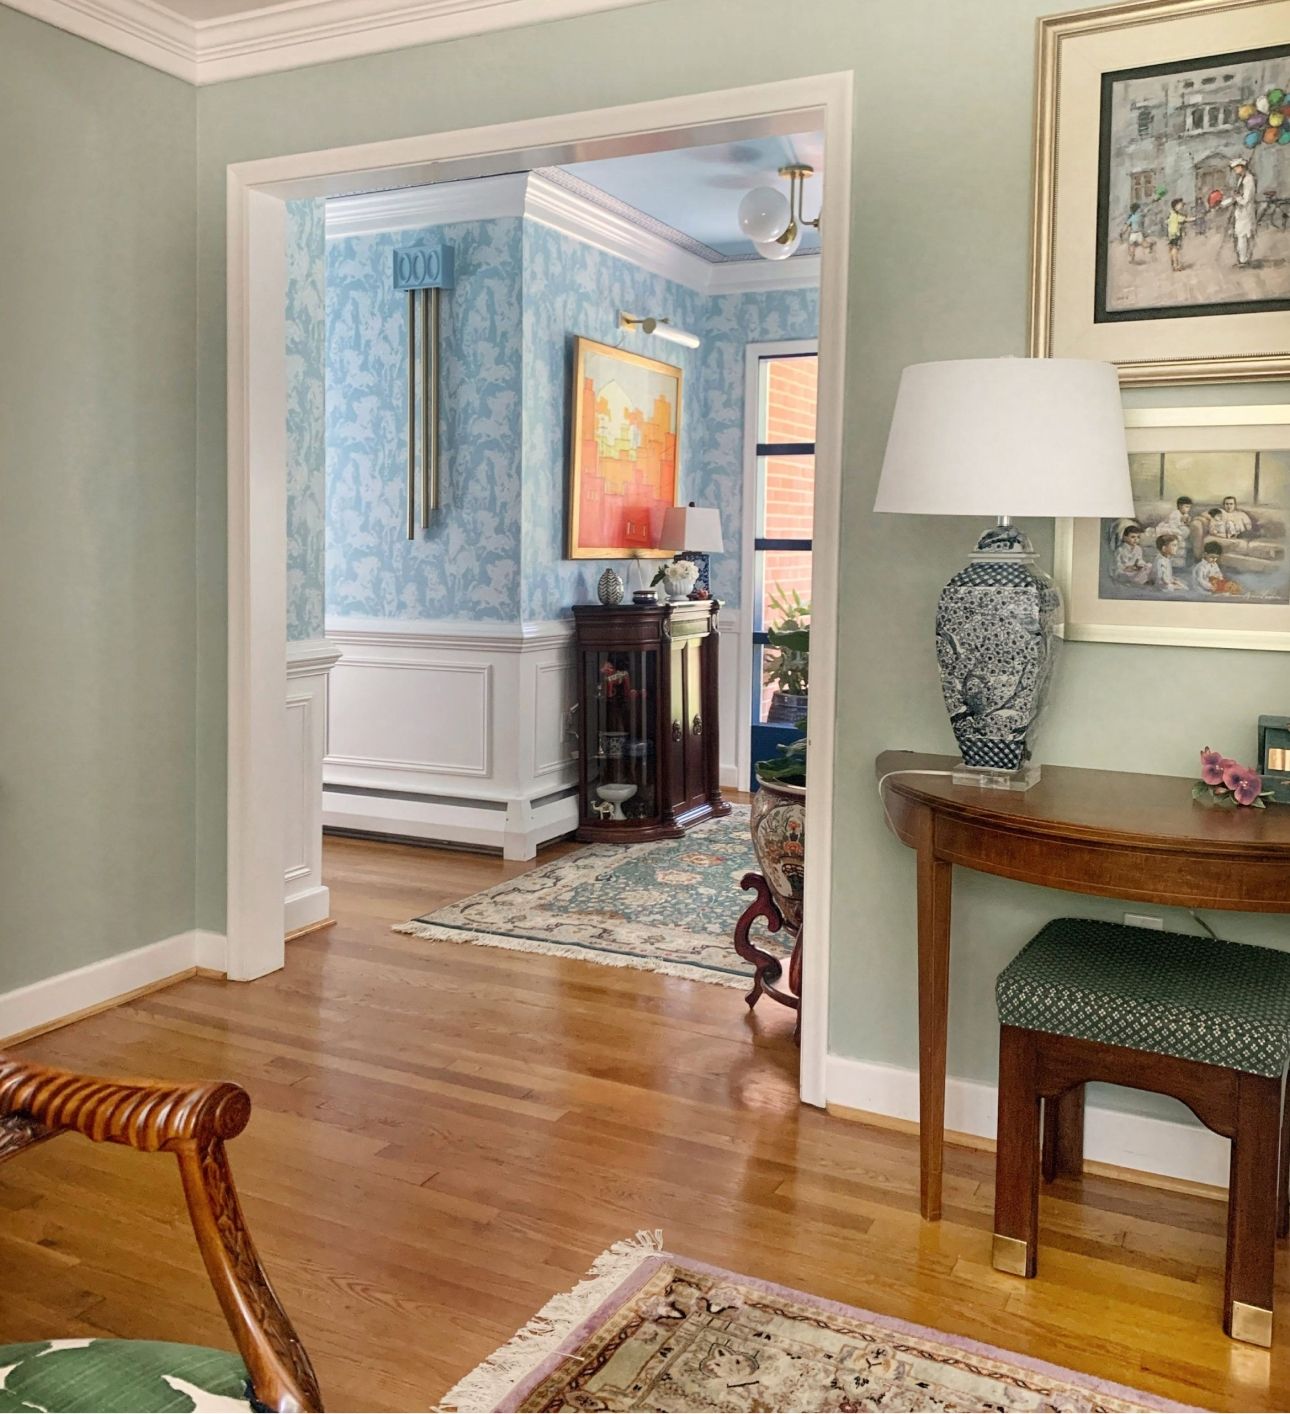 Image of the Entry way makeover by Merh Niazi using the Light Blue Stampede Wallpaper by Milton & King